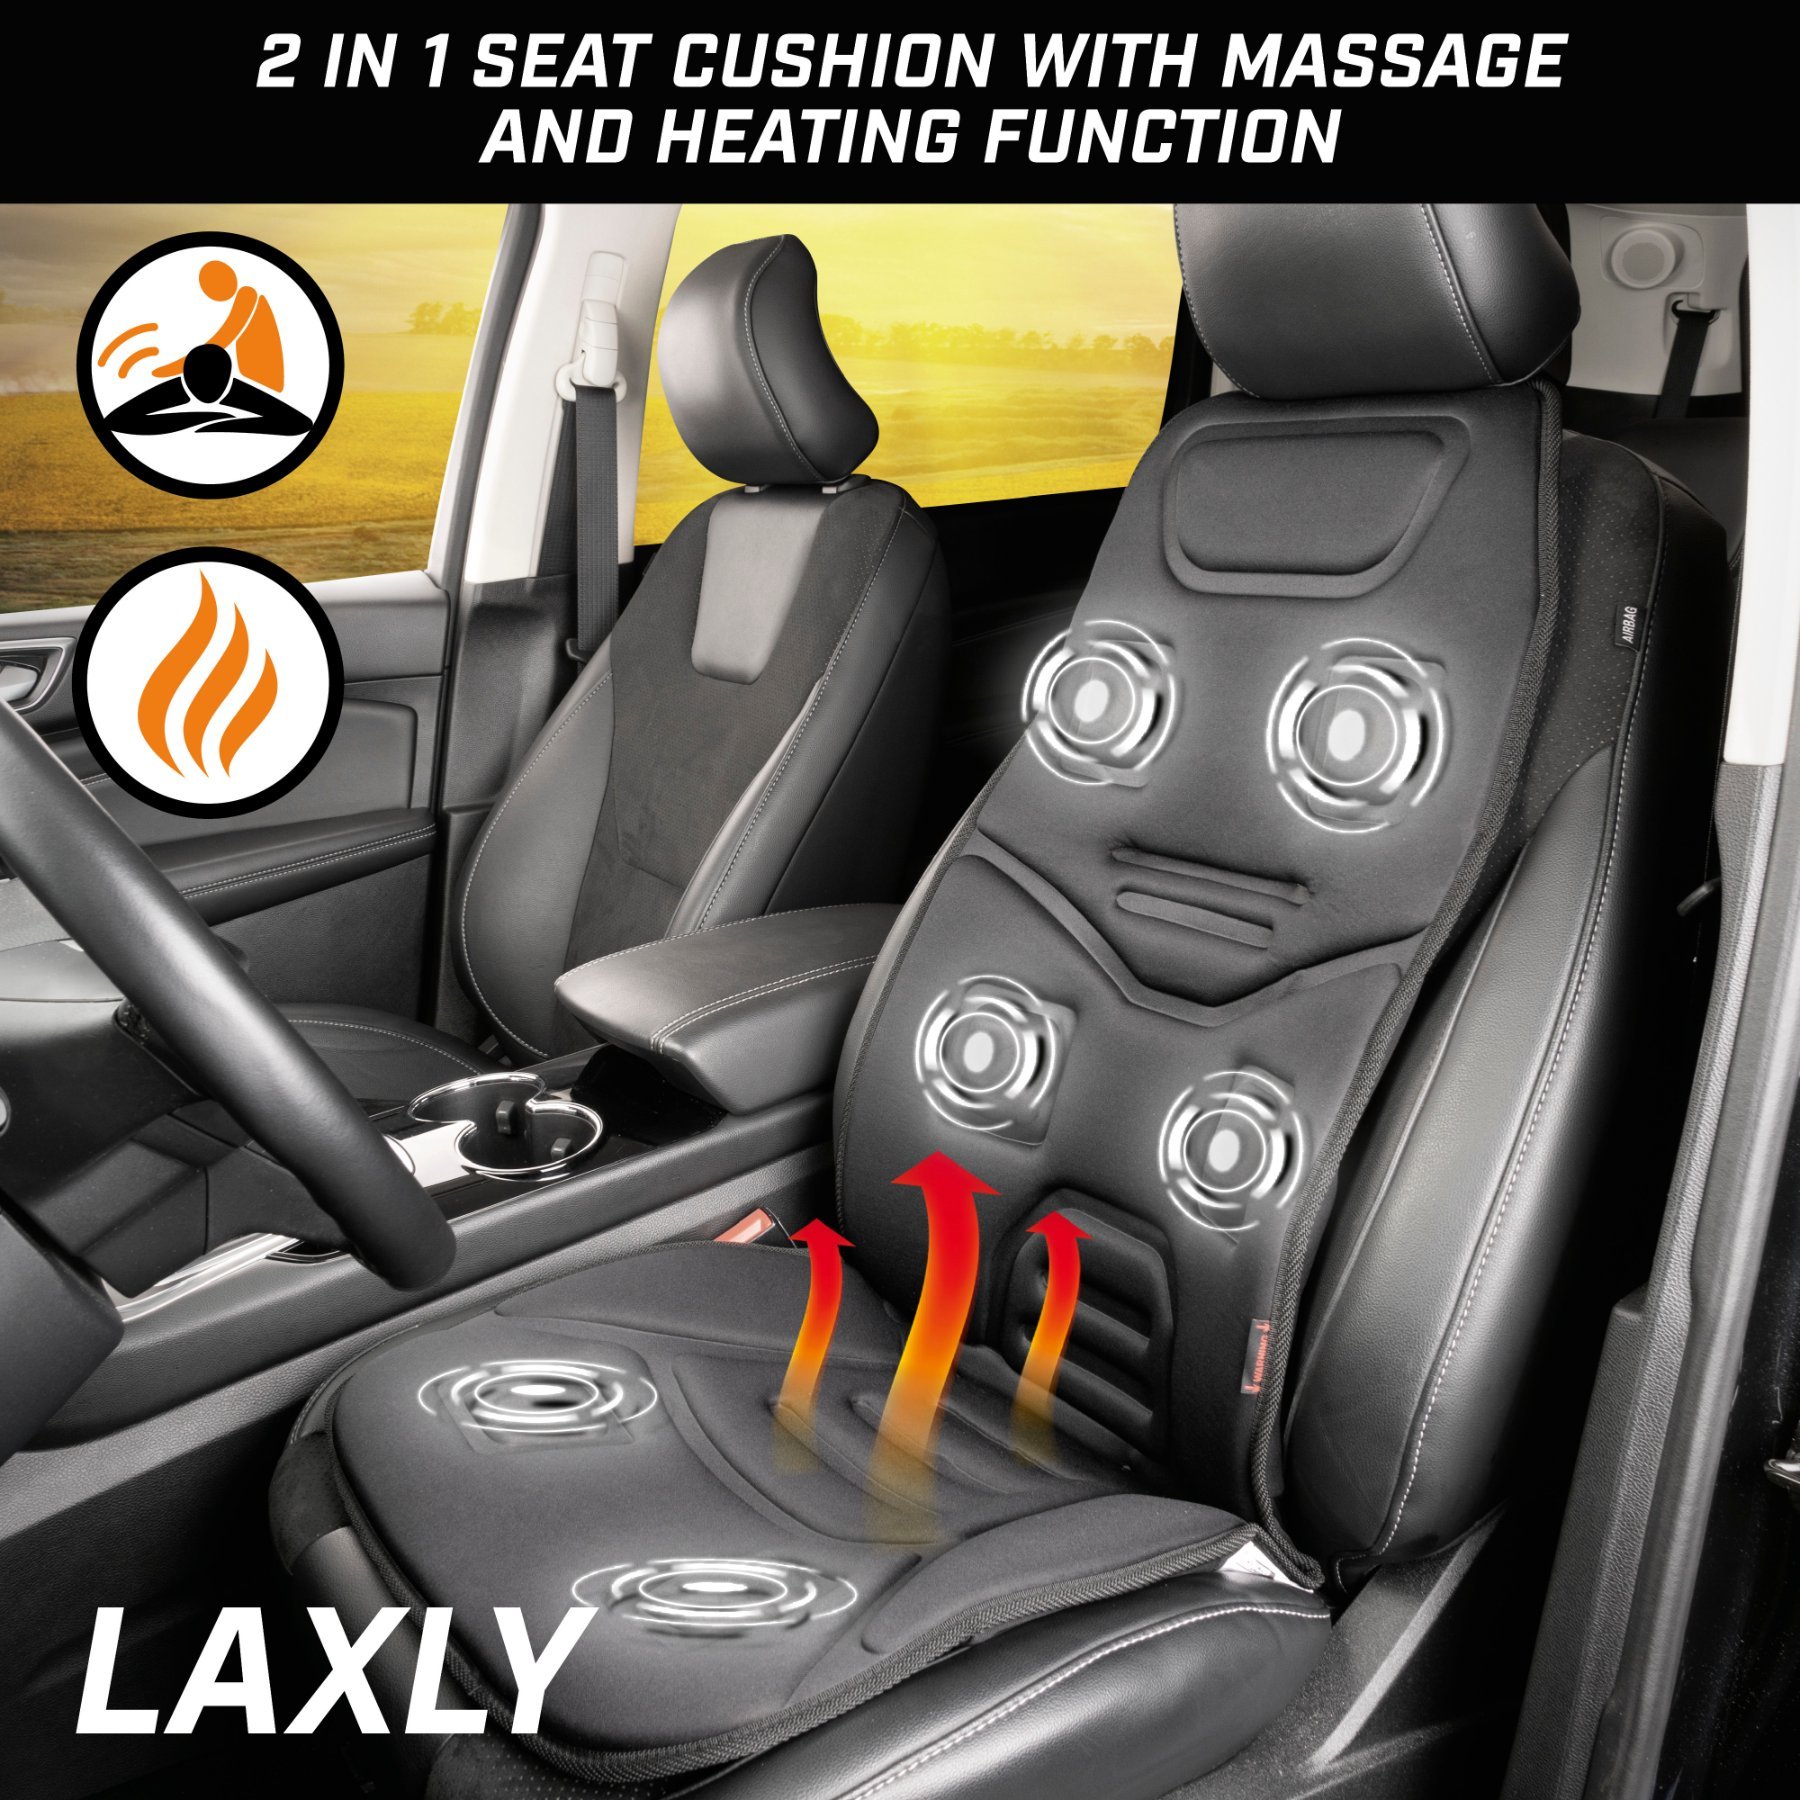 Massage seat cover Laxly, universal seat cover with massage and heat function